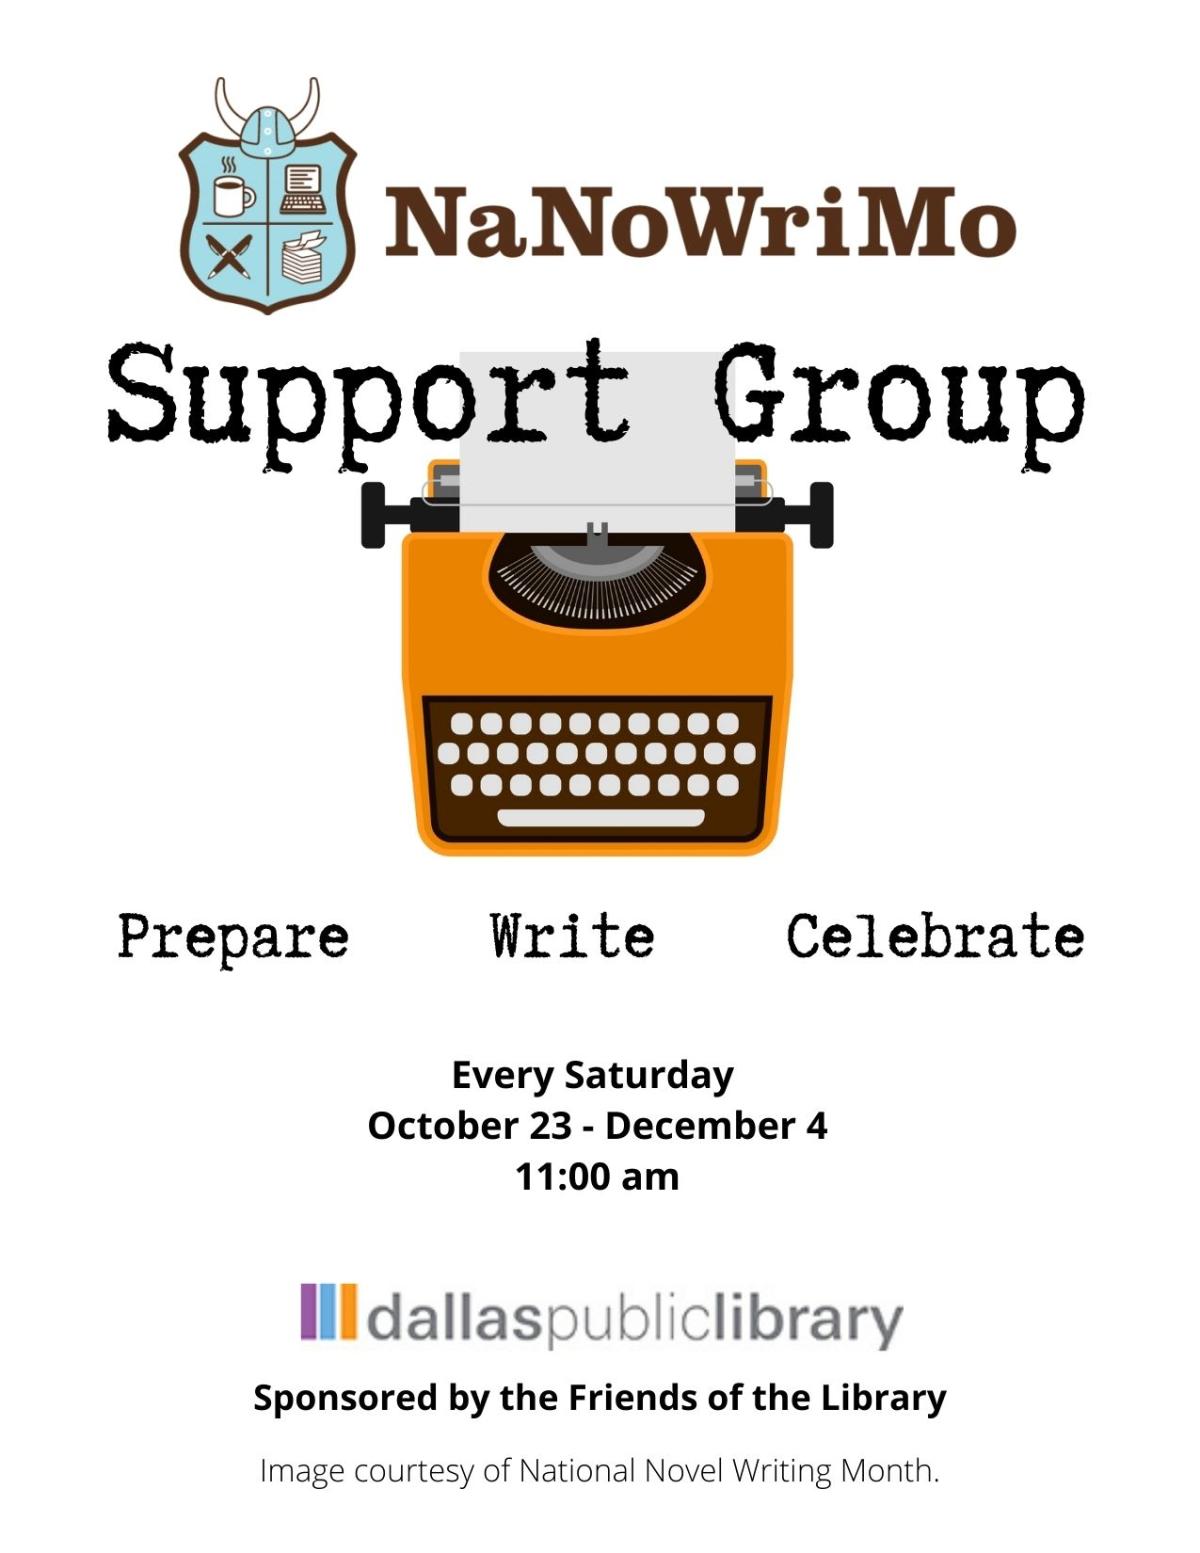 NaNoWriMo Support Group flyer